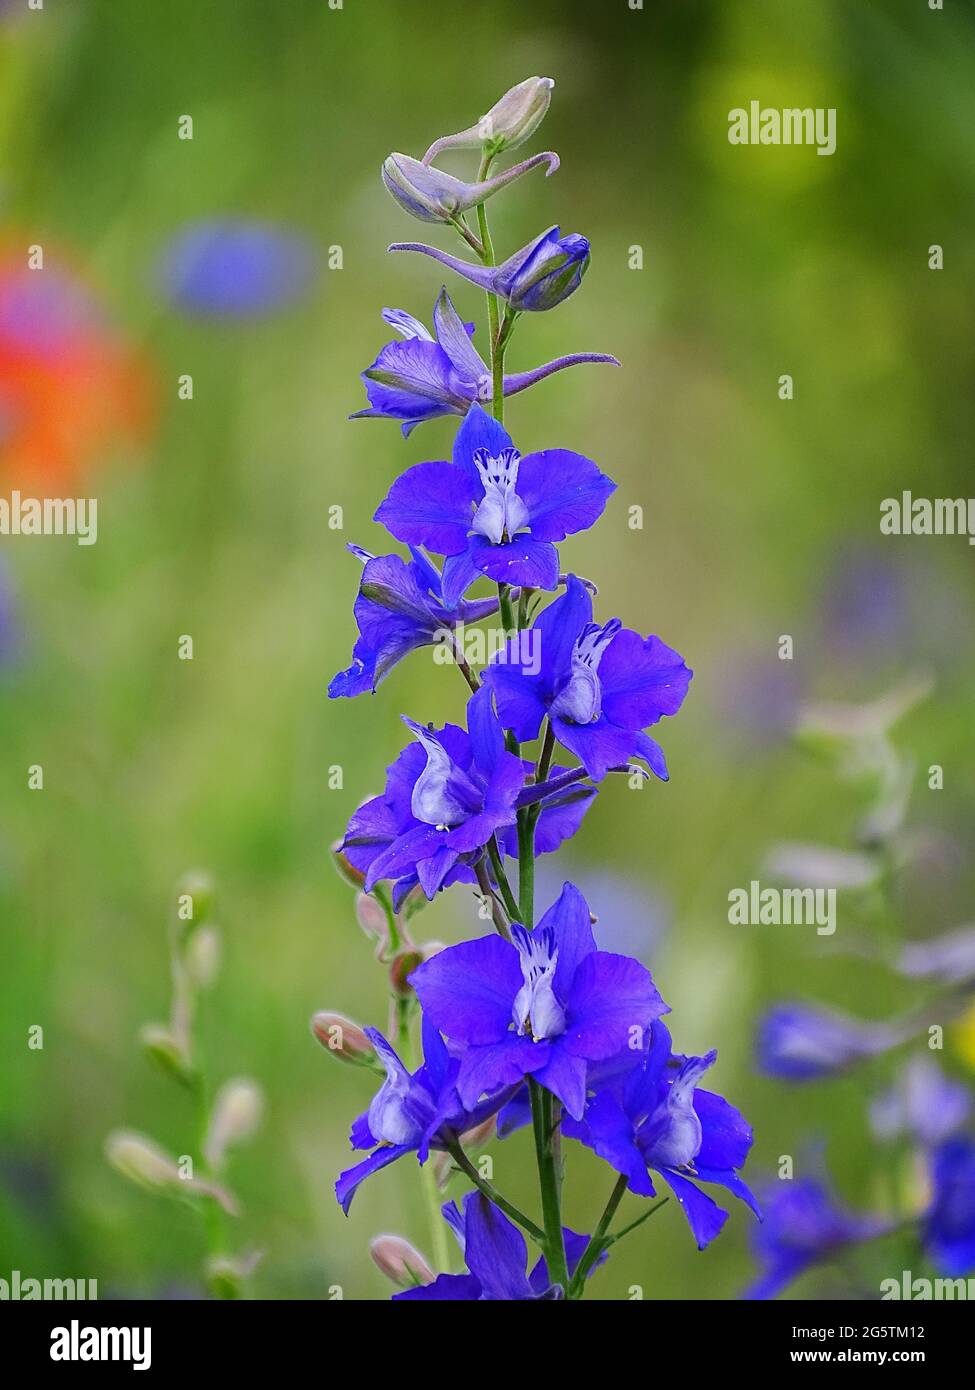 Blue one-year larkspur (Consolida ajacis) in the grass Stock Photo